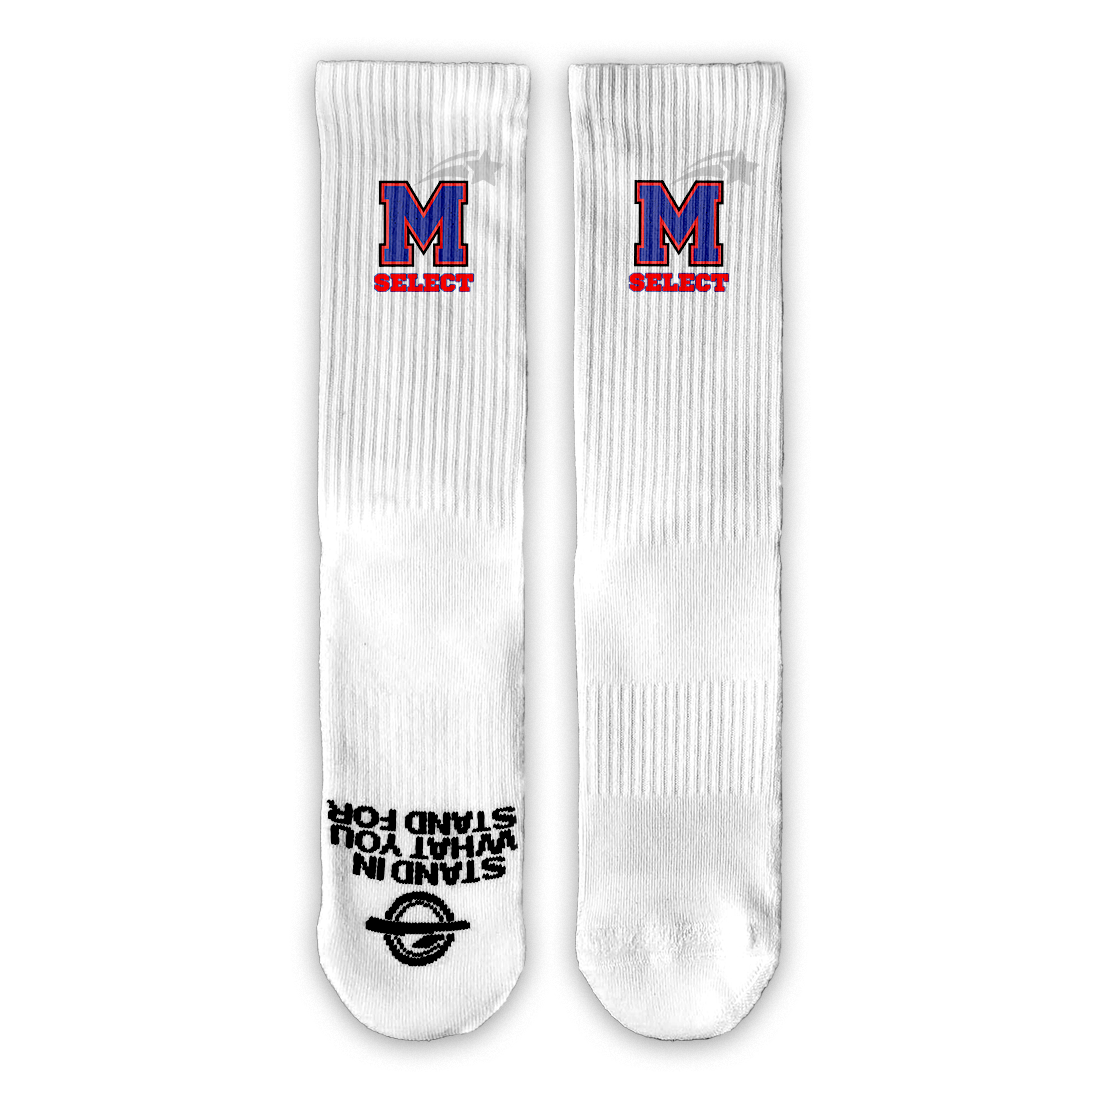 Medway Milford Select Lifestyle Socks